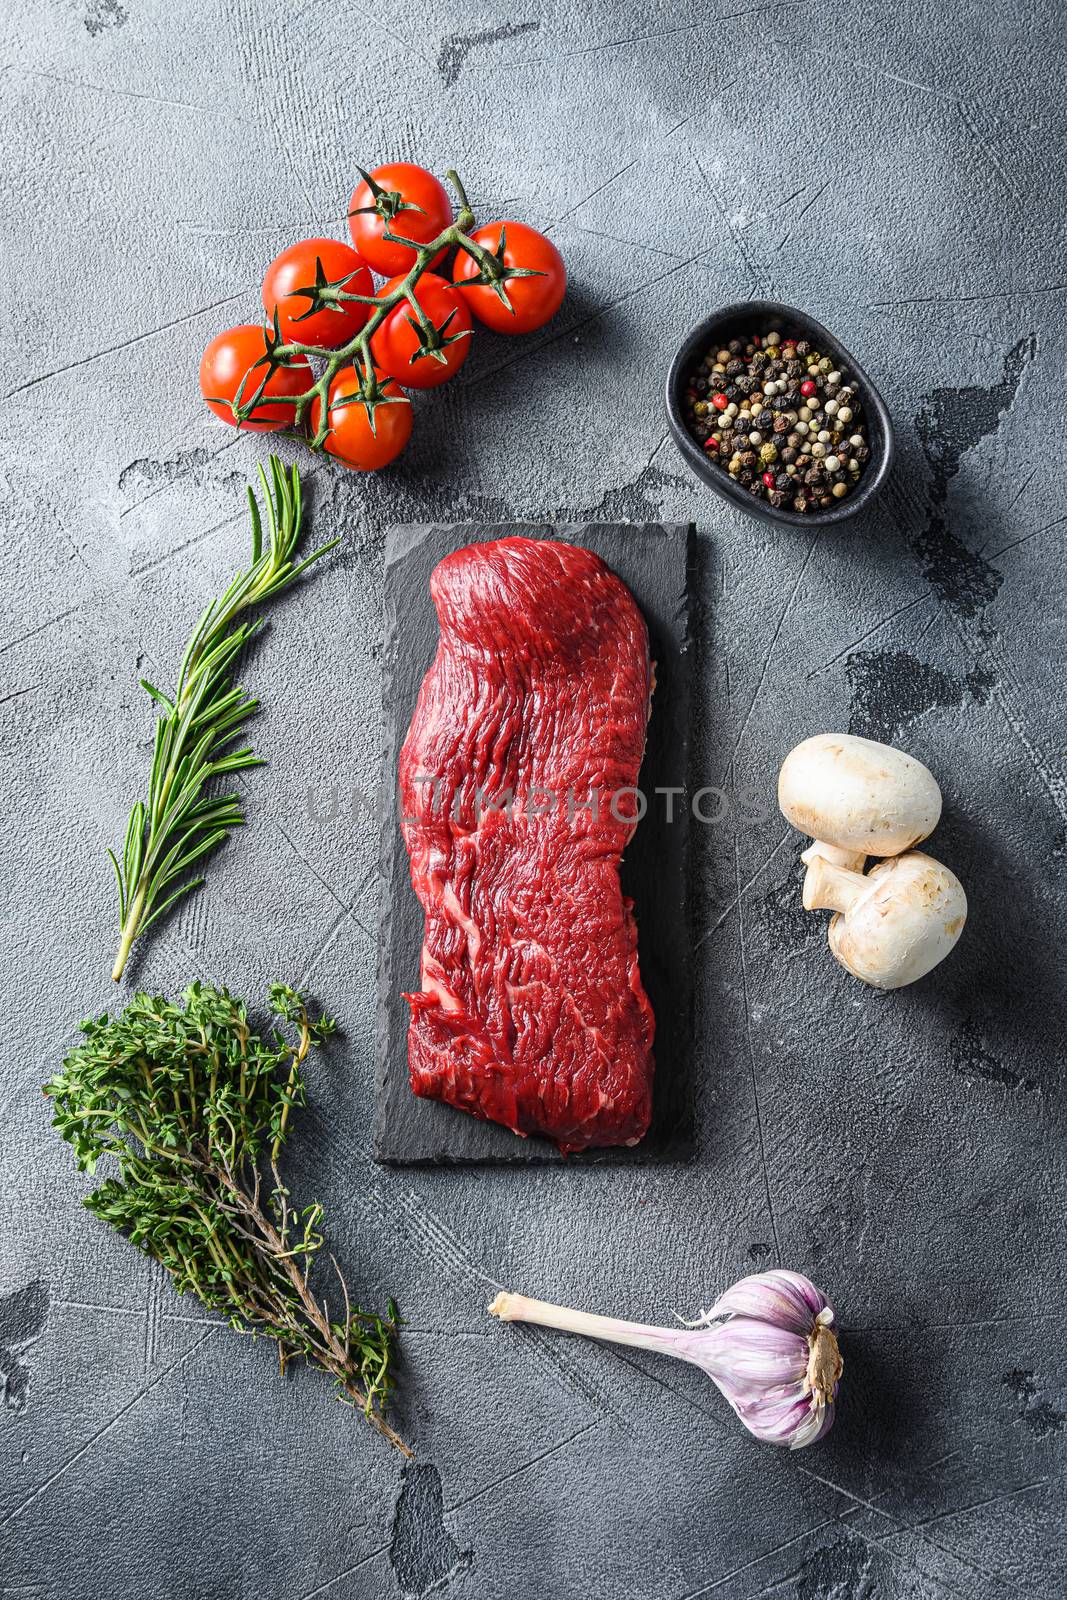 Organic Tri-tip, triangle roast marbled beef on black plate , marbled beef with herbs tomatoes peppercorns over grey stone surface background top view.